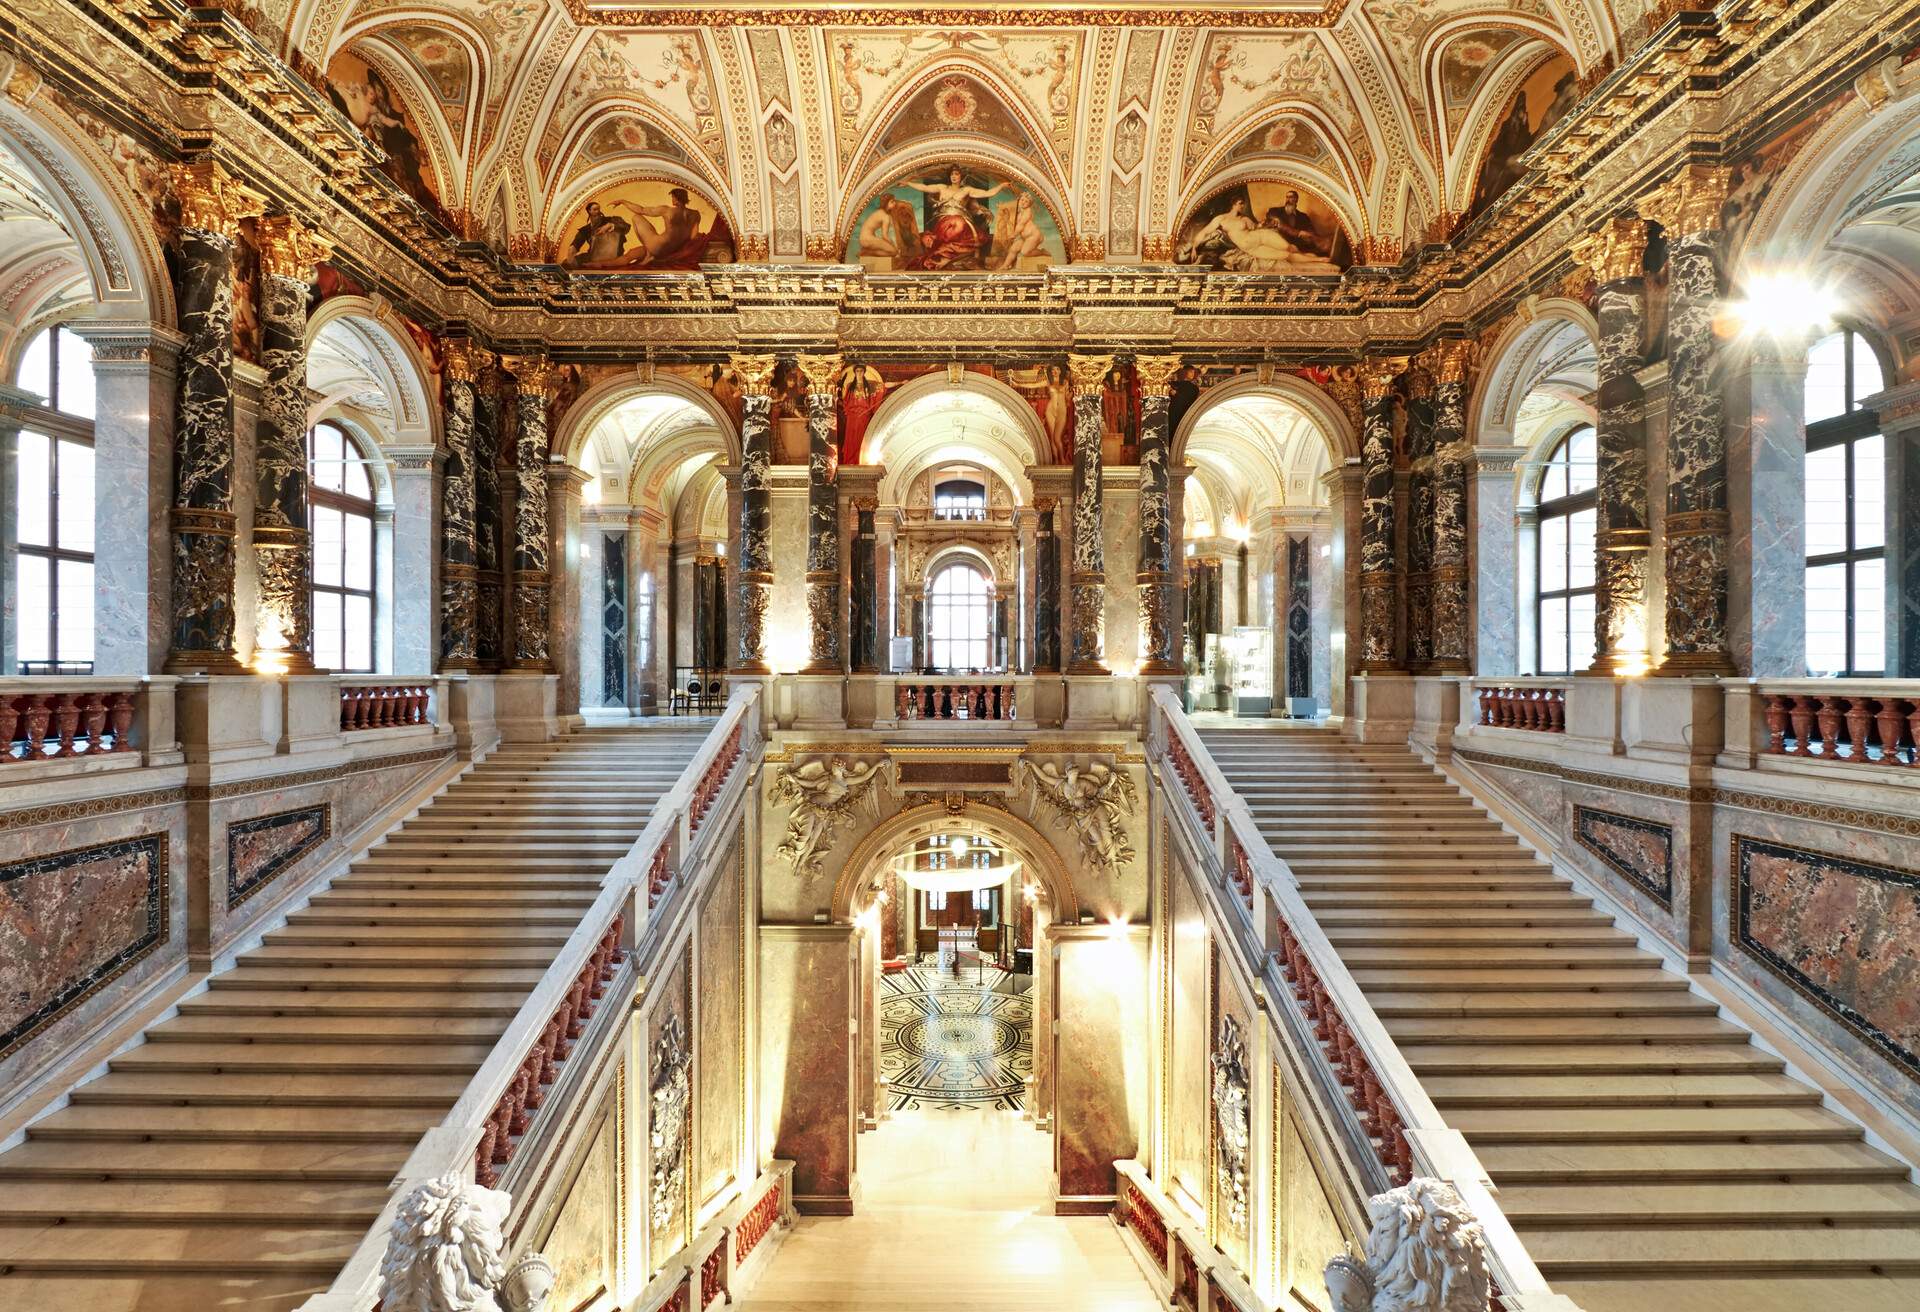 Adjacent to the grand staircase, the Kunsthistorisches Museum's interior boasts opulent marble flooring, ornate decorative mouldings, and soaring ceilings adorned with enchanting frescoes.